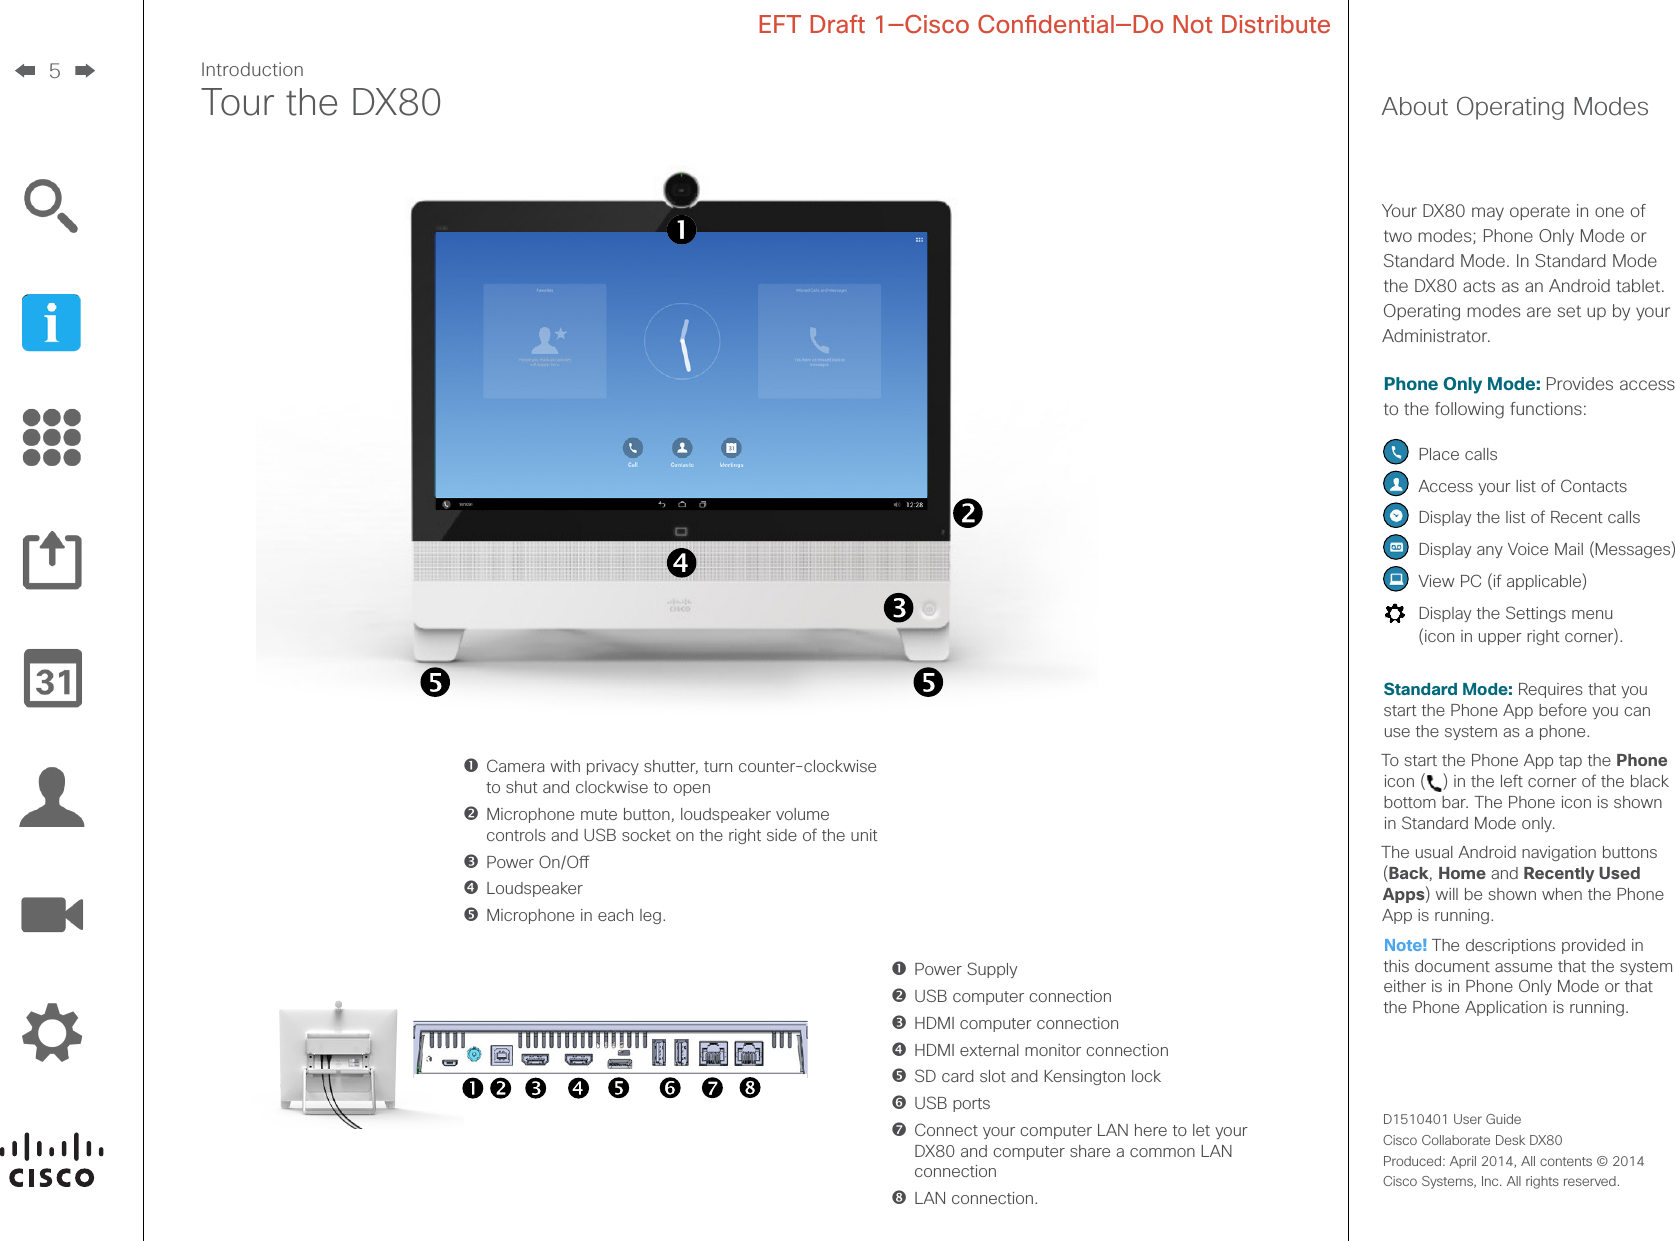 5D1510401 User Guide  Cisco Collaborate Desk DX80Produced: April 2014, All contents © 2014  Cisco Systems, Inc. All rights reserved. EFT Draft 1—Cisco Condential—Do Not DistributeIntroductionTour the DX80Camera with privacy shutter, turn counter-clockwise to shut and clockwise to openMicrophone mute button, loudspeaker volume controls and USB socket on the right side of the unitPower On/OLoudspeakerMicrophone in each leg.  Power Supply  USB computer connection  HDMI computer connection  HDMI external monitor connection  SD card slot and Kensington lock   USB  ports  Connect your computer LAN here to let your DX80 and computer share a common LAN connection   LAN  connection.About Operating ModesYour DX80 may operate in one of two modes; Phone Only Mode or Standard Mode. In Standard Mode the DX80 acts as an Android tablet. Operating modes are set up by your Administrator.Phone Only Mode: Provides access to the following functions:  Place calls Access your list of Contacts  Display the list of Recent calls  Display any Voice Mail (Messages)  View PC (if applicable)  Display the Settings menu  (icon in upper right corner).Standard Mode: Requires that you start the Phone App before you can use the system as a phone. To start the Phone App tap the Phone icon ( ) in the left corner of the black bottom bar. The Phone icon is shown in Standard Mode only.The usual Android navigation buttons (Back, Home and Recently Used Apps) will be shown when the Phone App is running.Note! The descriptions provided in this document assume that the system either is in Phone Only Mode or that the Phone Application is running.